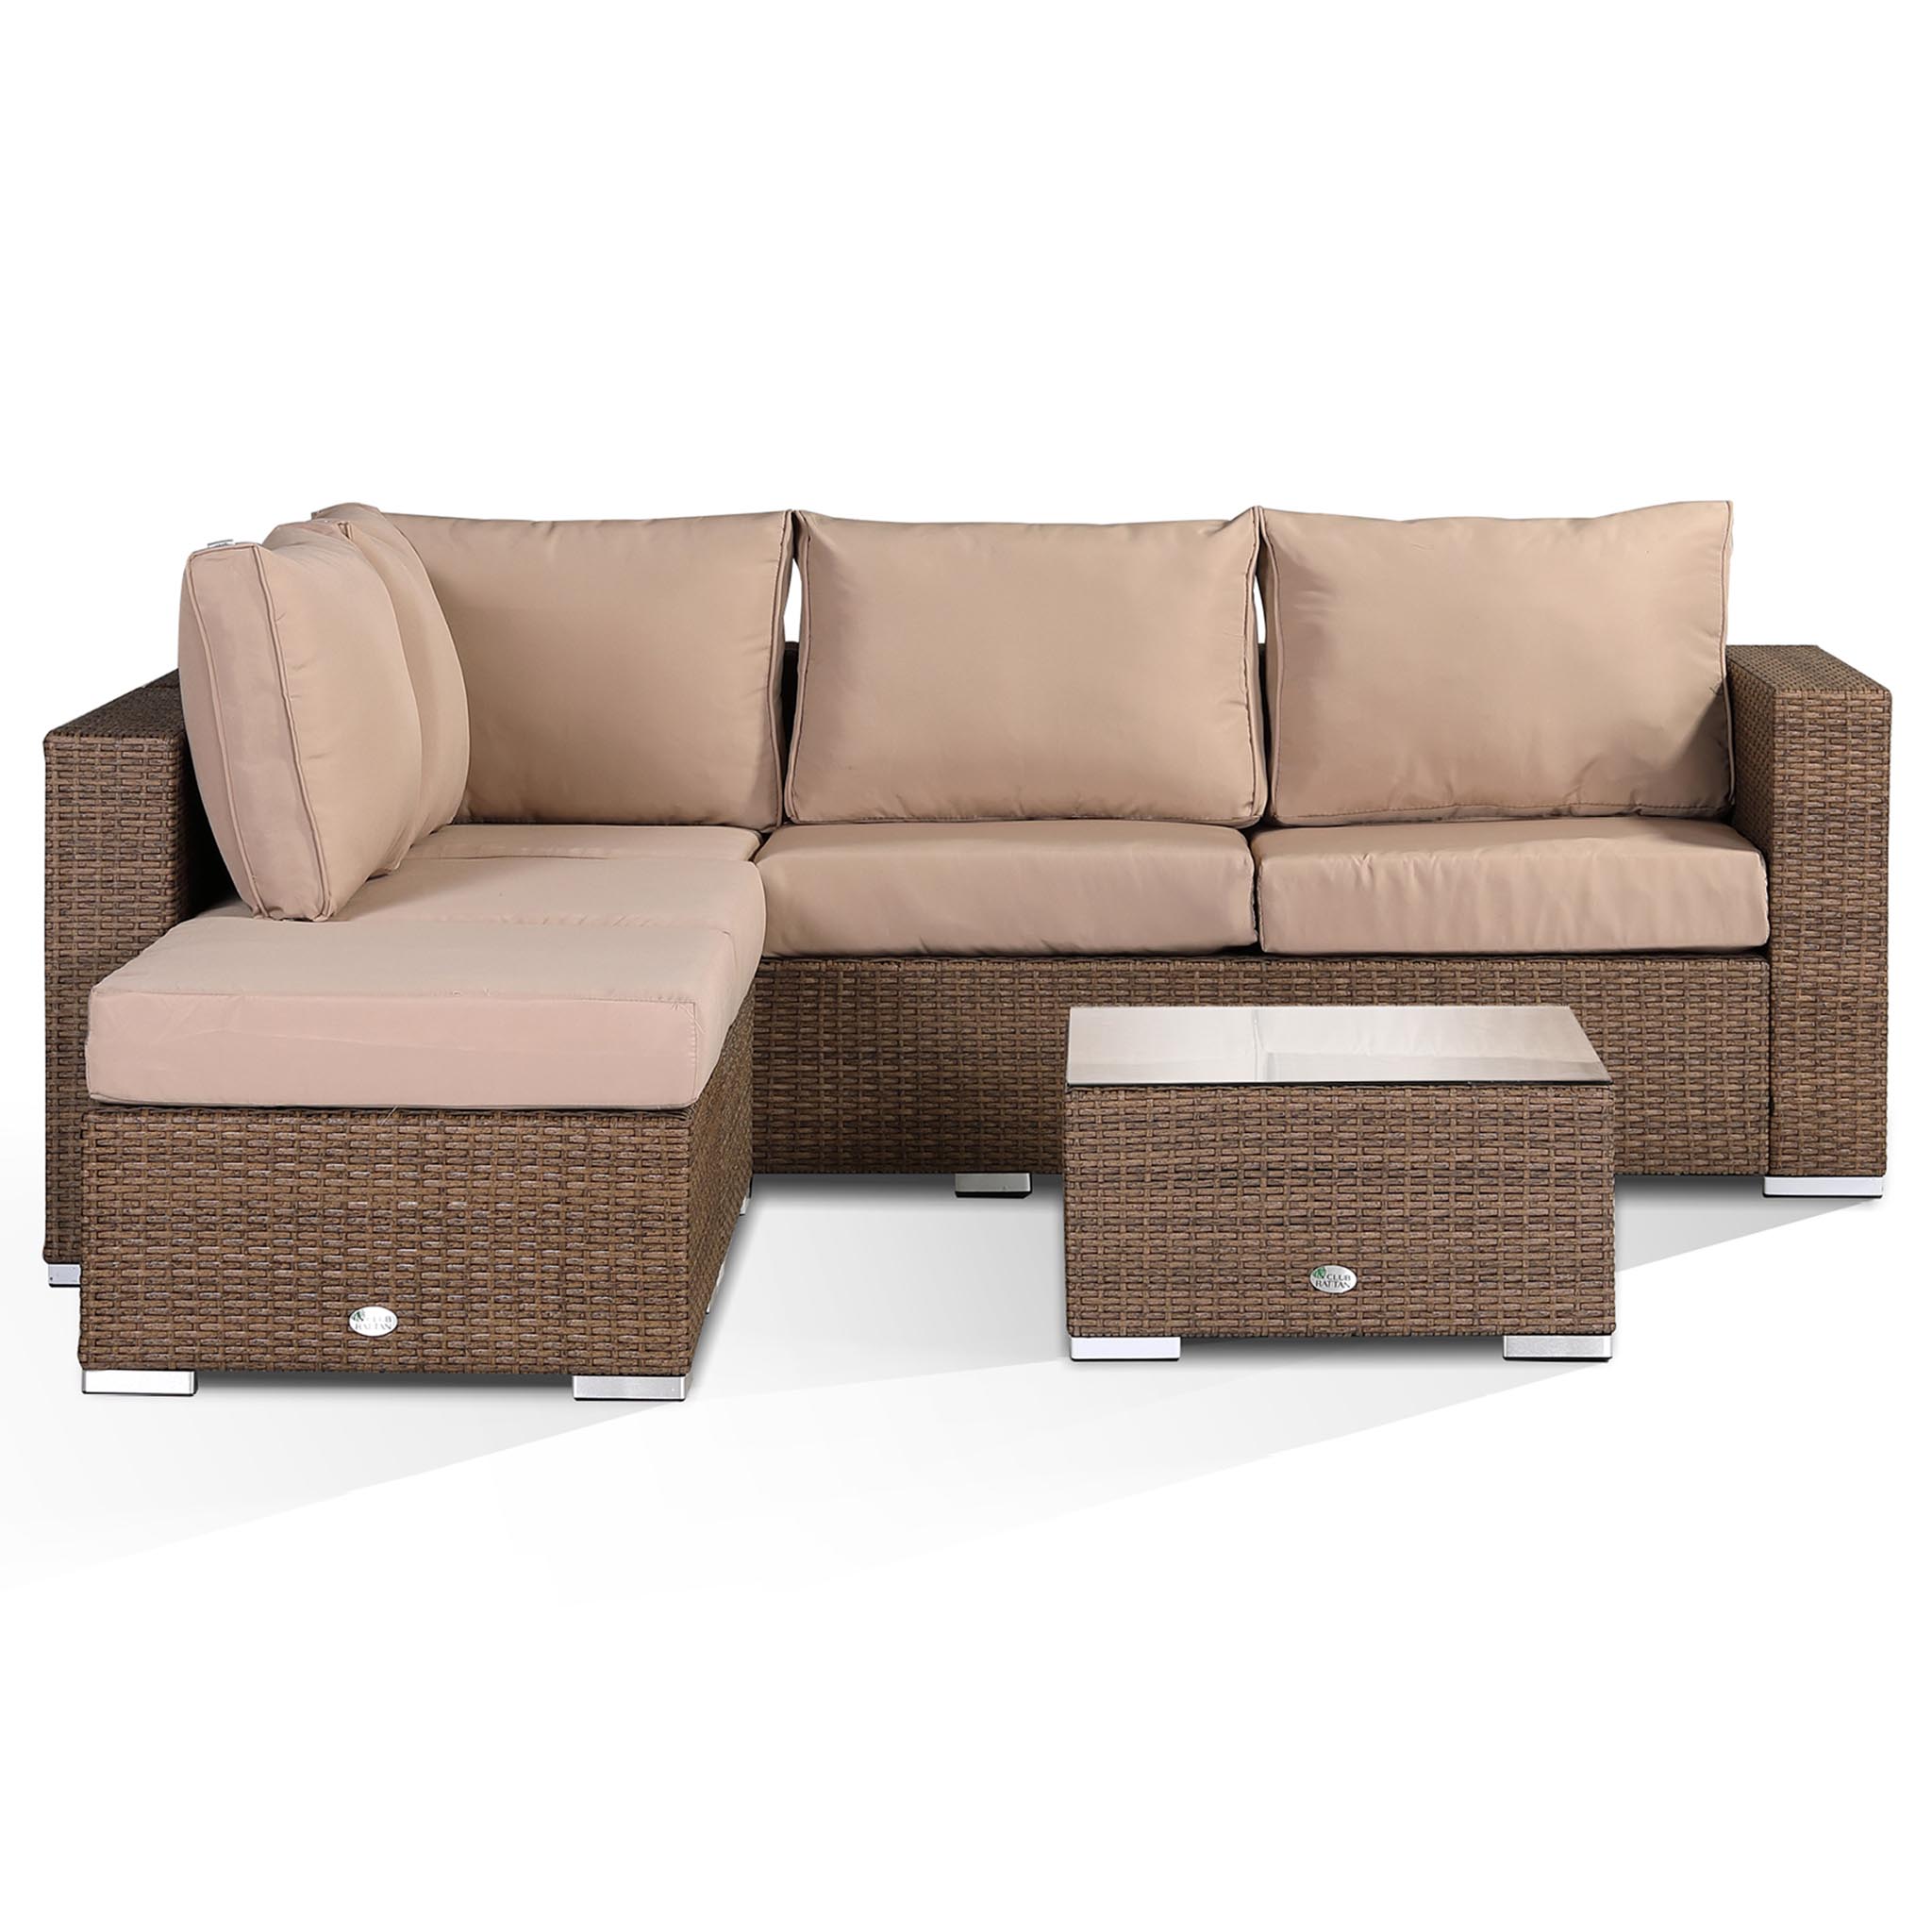 Blossom 3 Seater Sofa with Chaise and Coffee Table in Small Brown Rattan